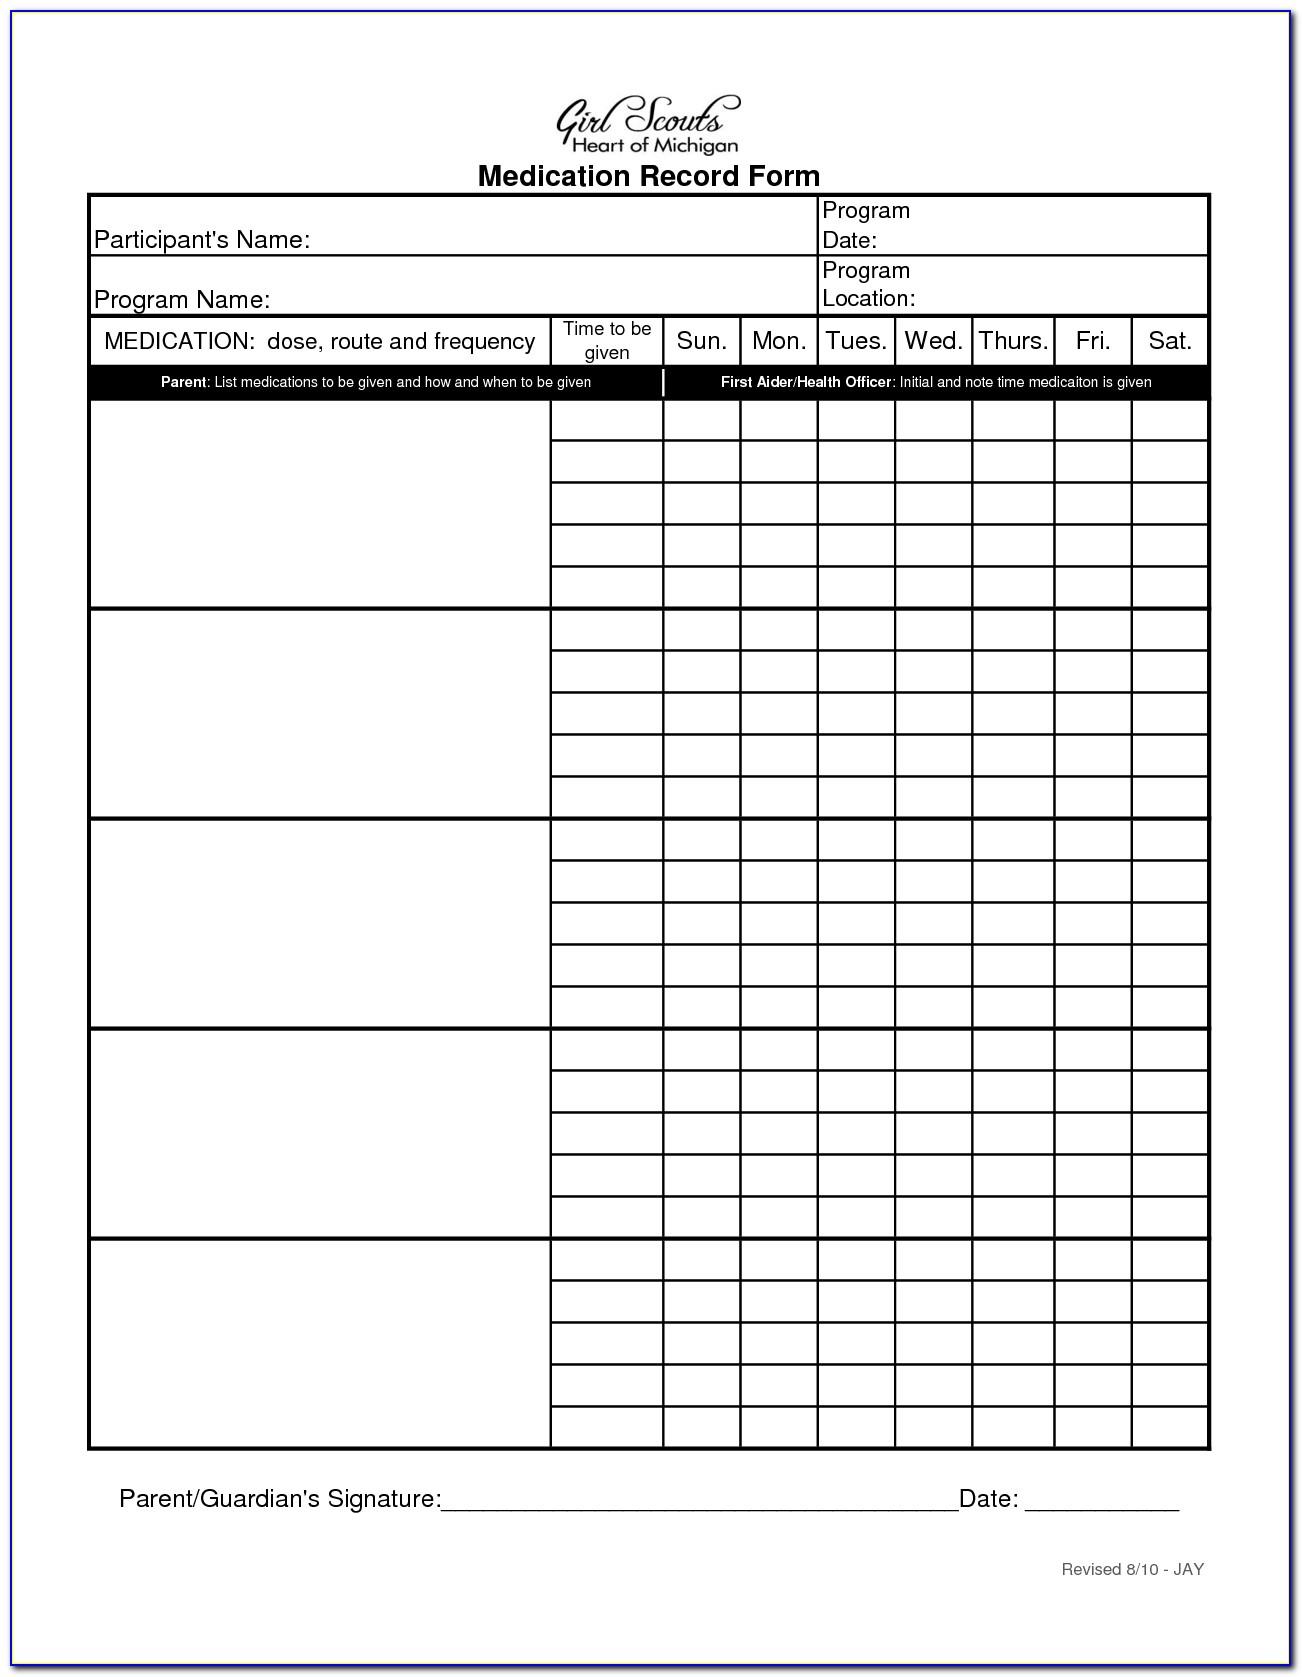 Medication Administration Record Template Pdf